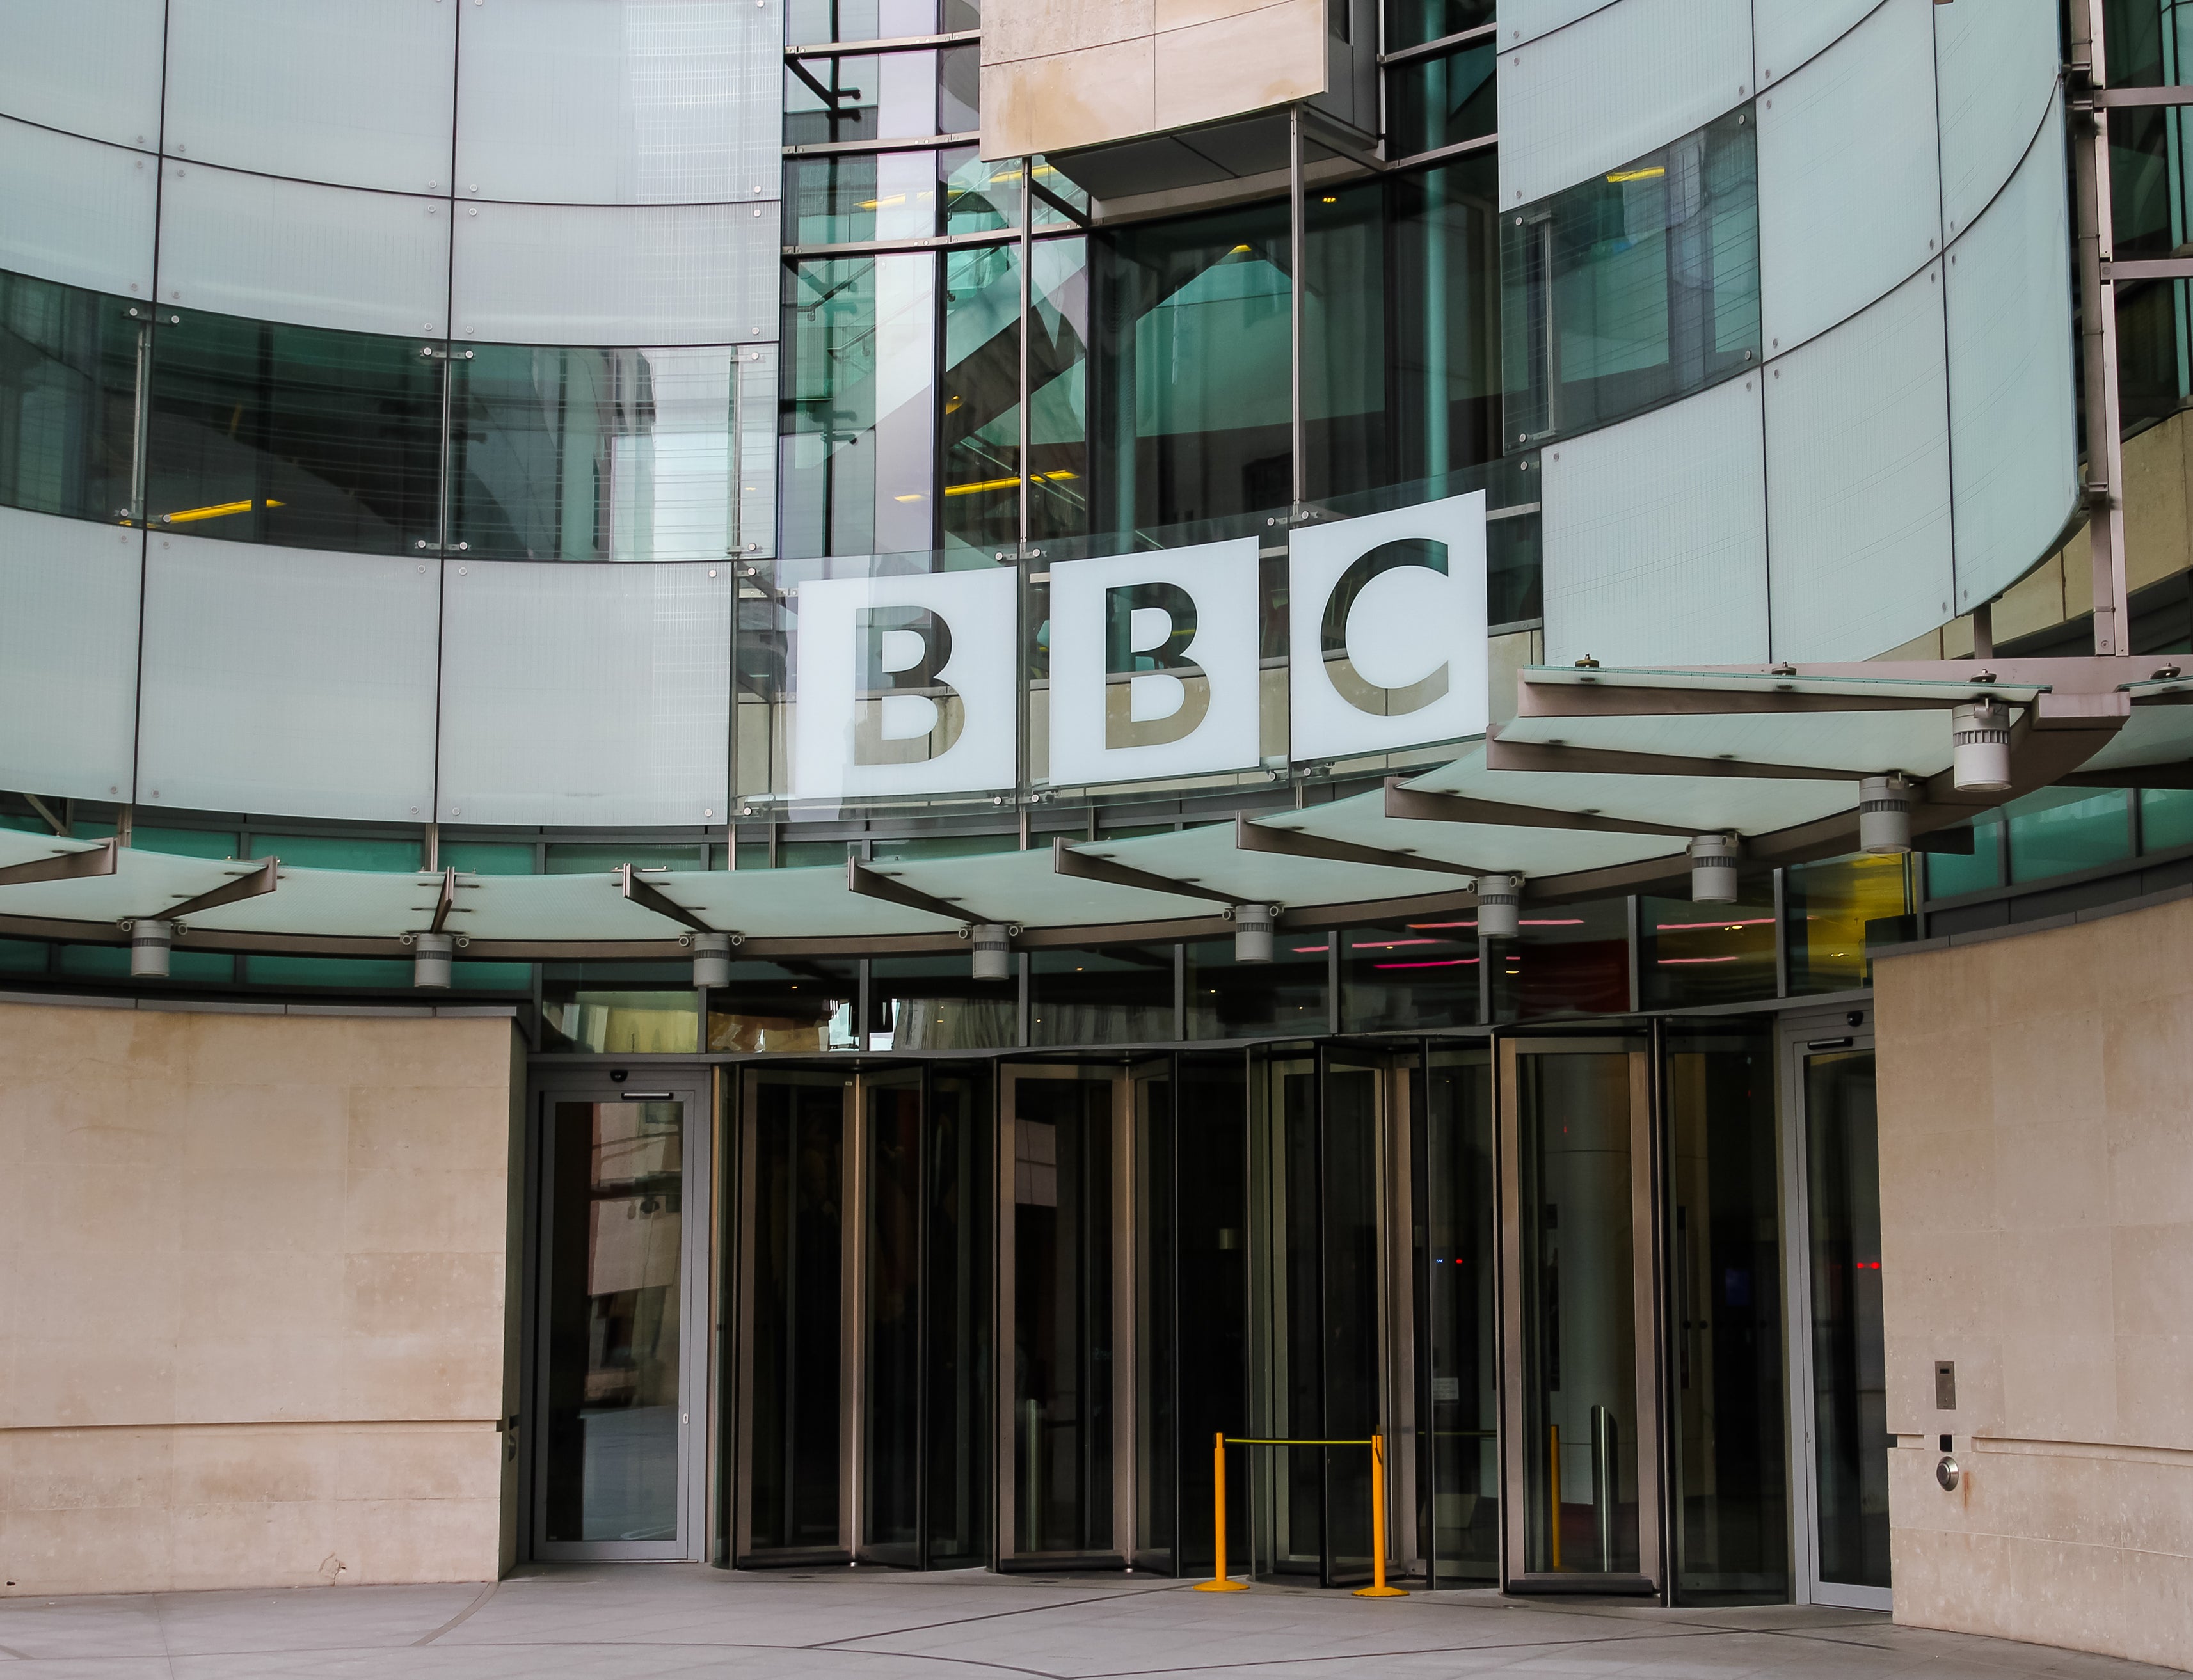 <p>The BBC has already taken many steps to ensure such breaches of trust with the viewer do not occur again</p>